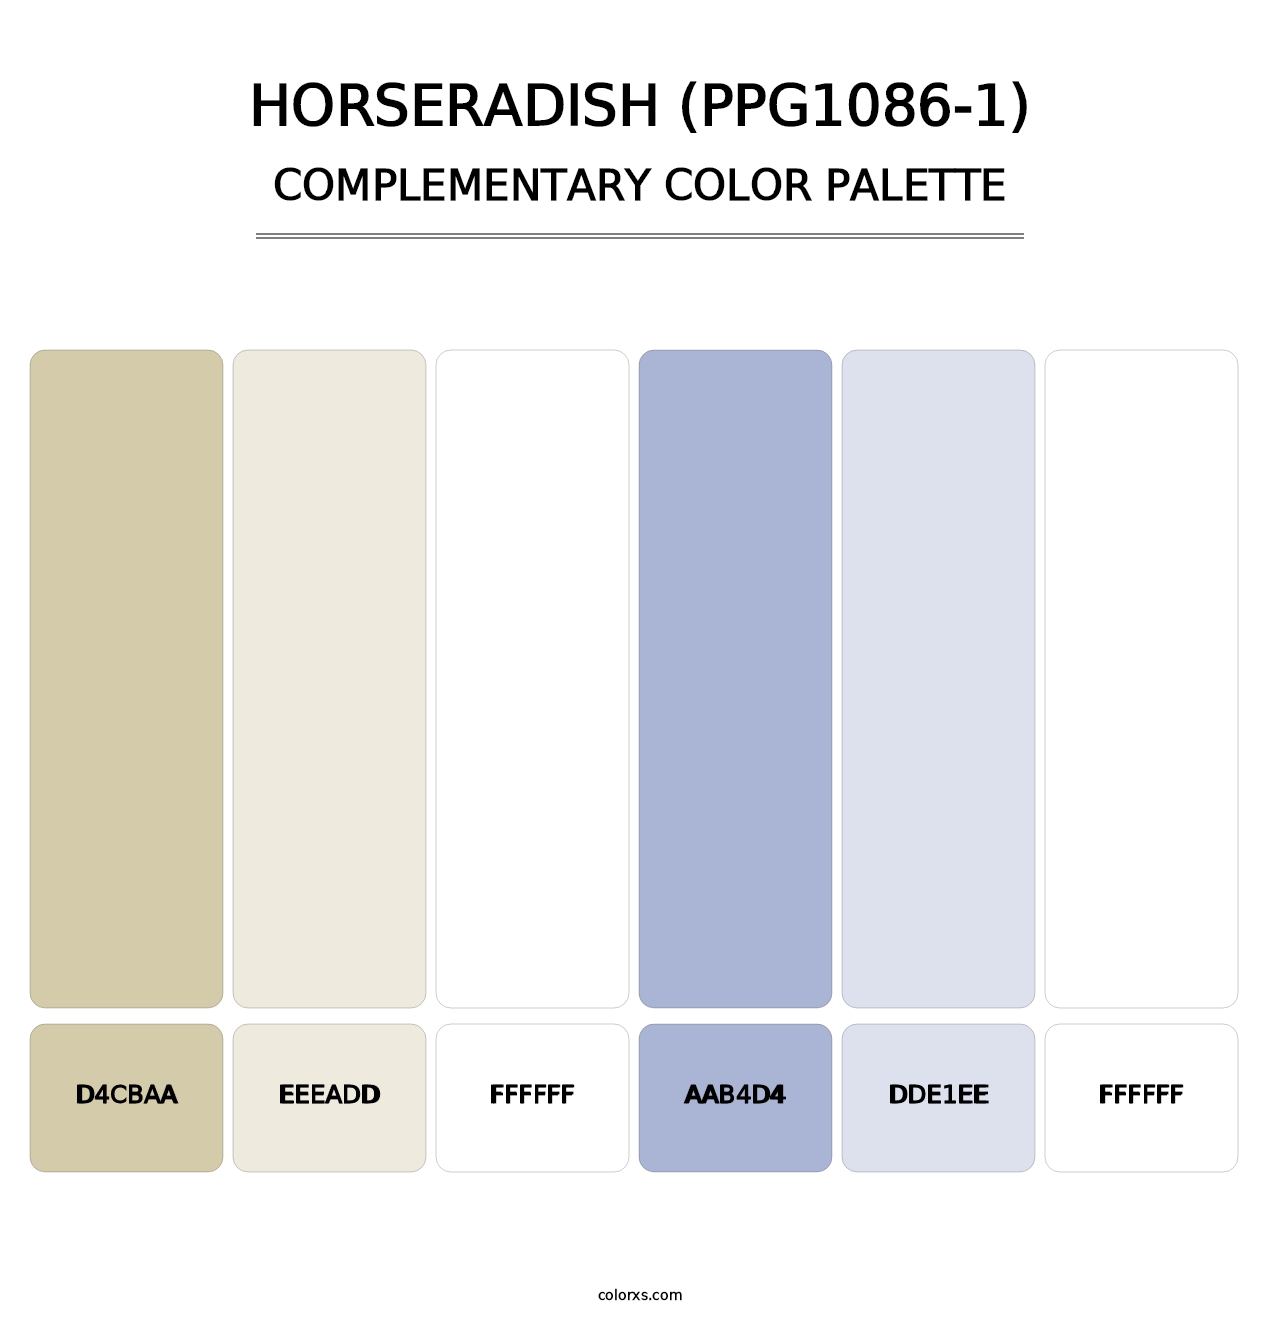 Horseradish (PPG1086-1) - Complementary Color Palette